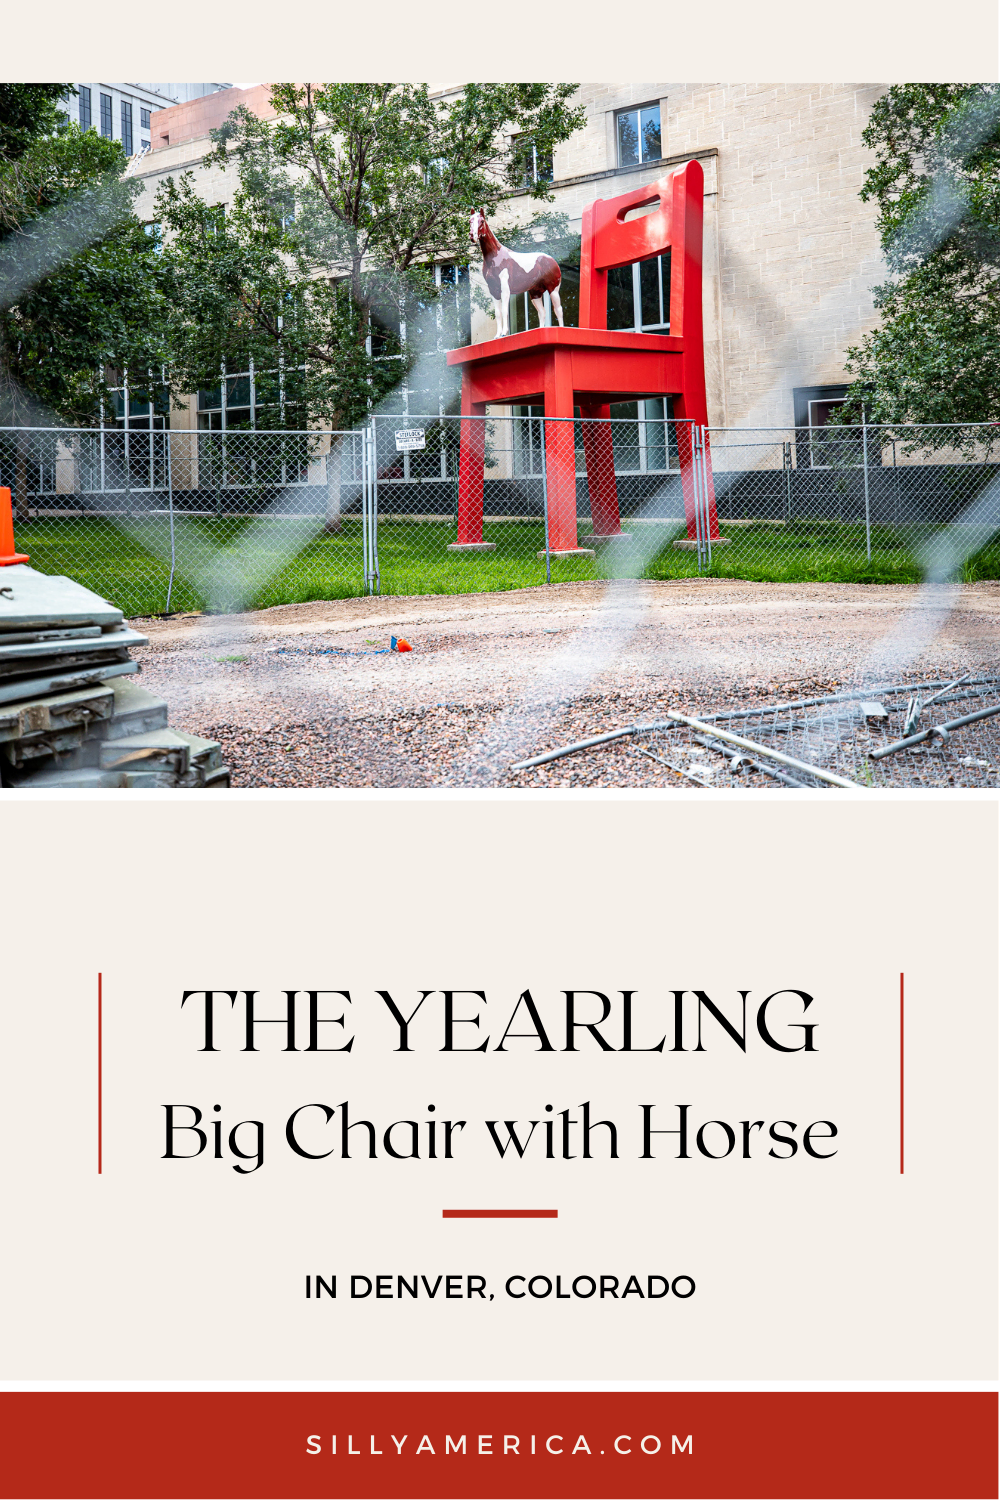 This Denver roadside attraction will have you saying yyay and neigh! It is The Yearling, a big red chair with a horse in Denver, Colorado. The Yearling features a 21-foot tall, 10-foot wide red-painted steel chair. Standing on top of the seat is "Scout," a young 6-foot tall fiberglass pinto horse. #Denver #DenverColorado #RoadTrip #RoadsideAttraction #RoadsideAttractions